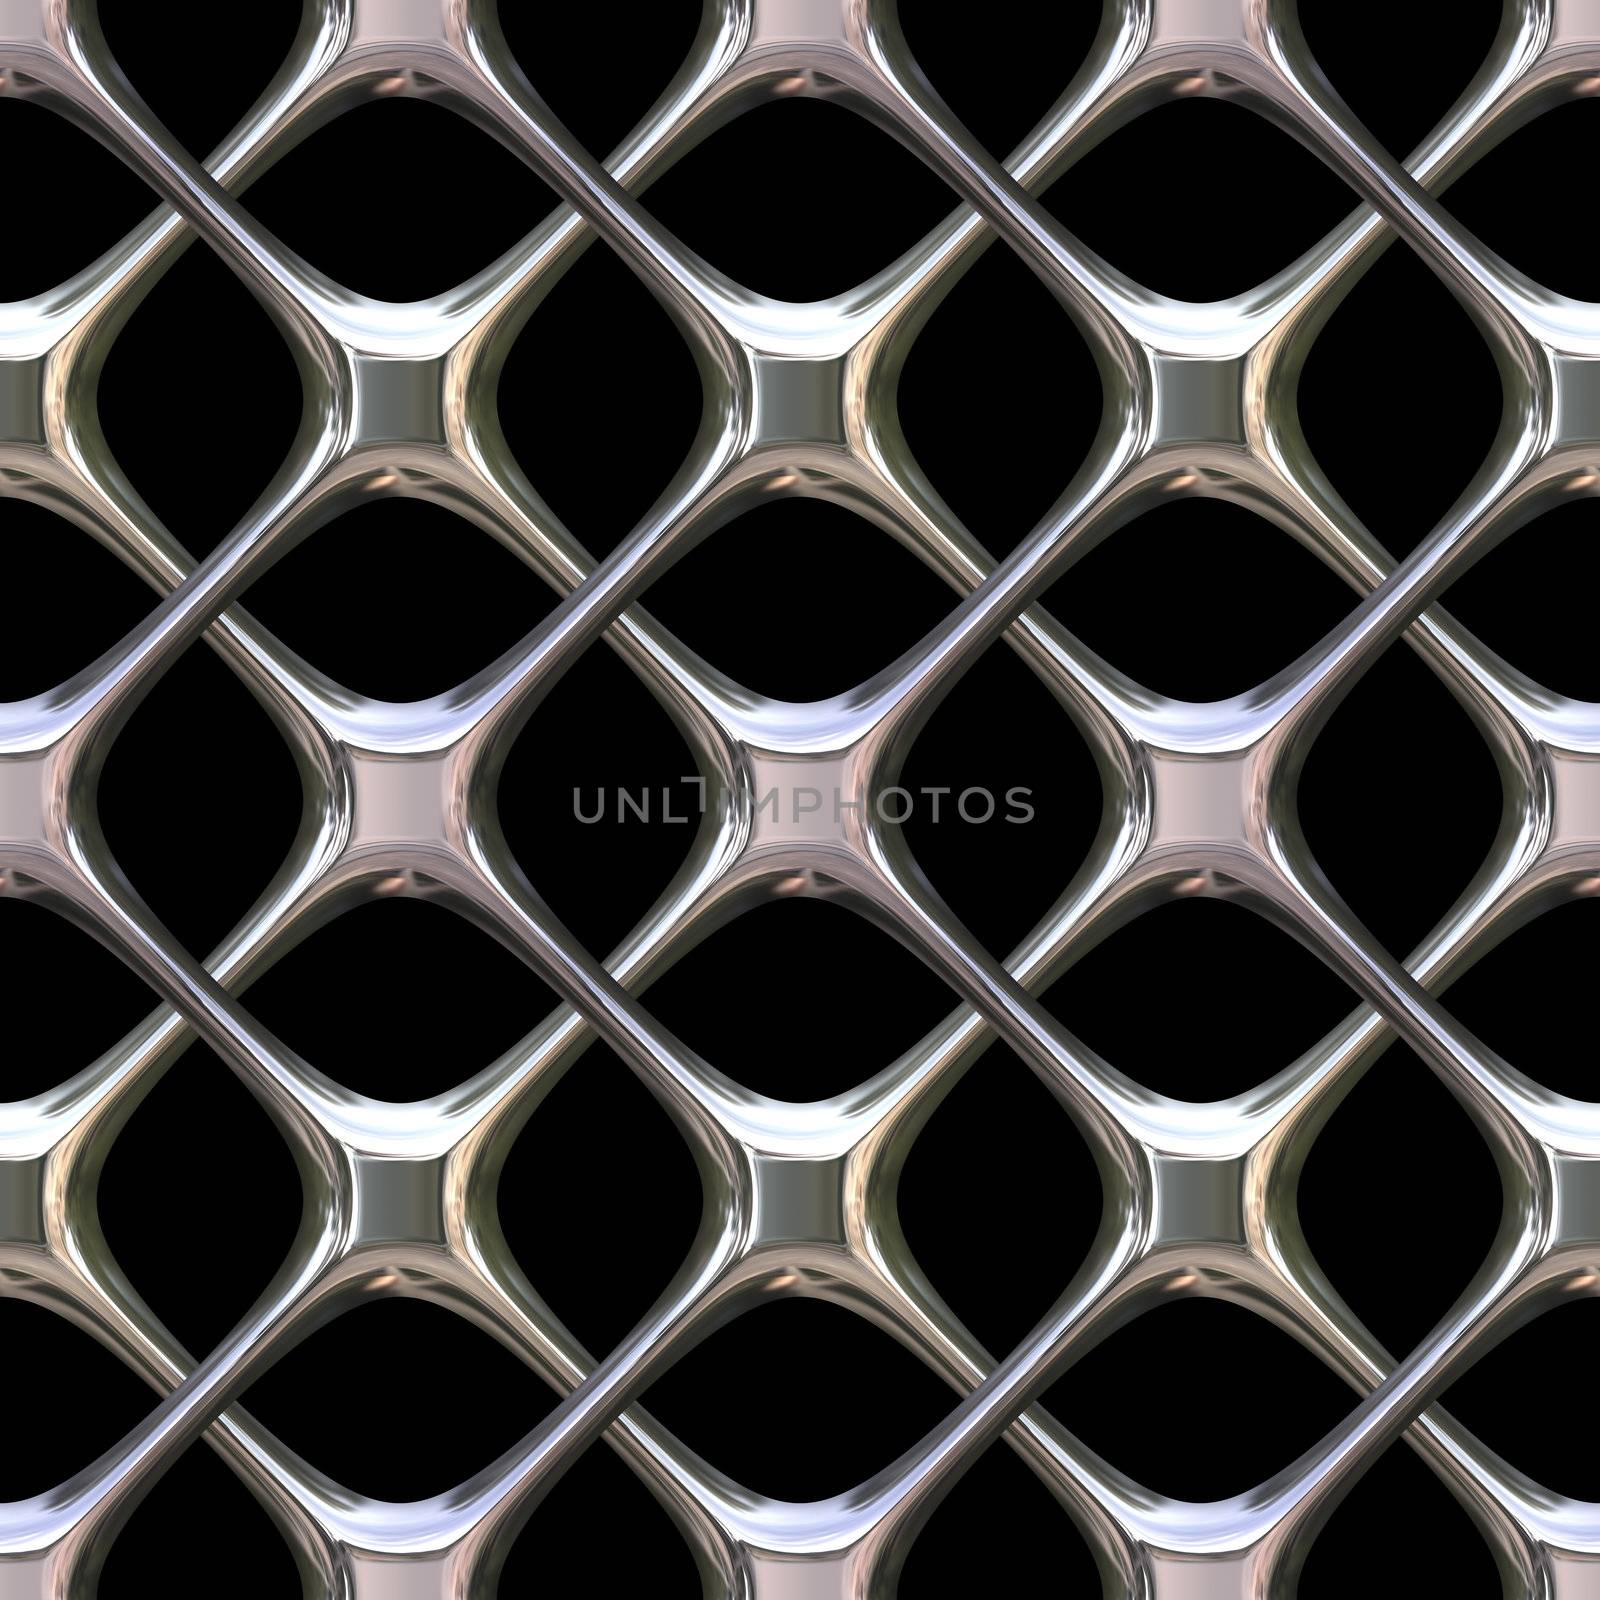 A shiny chrome grill background that tiles seamlessly as a pattern.